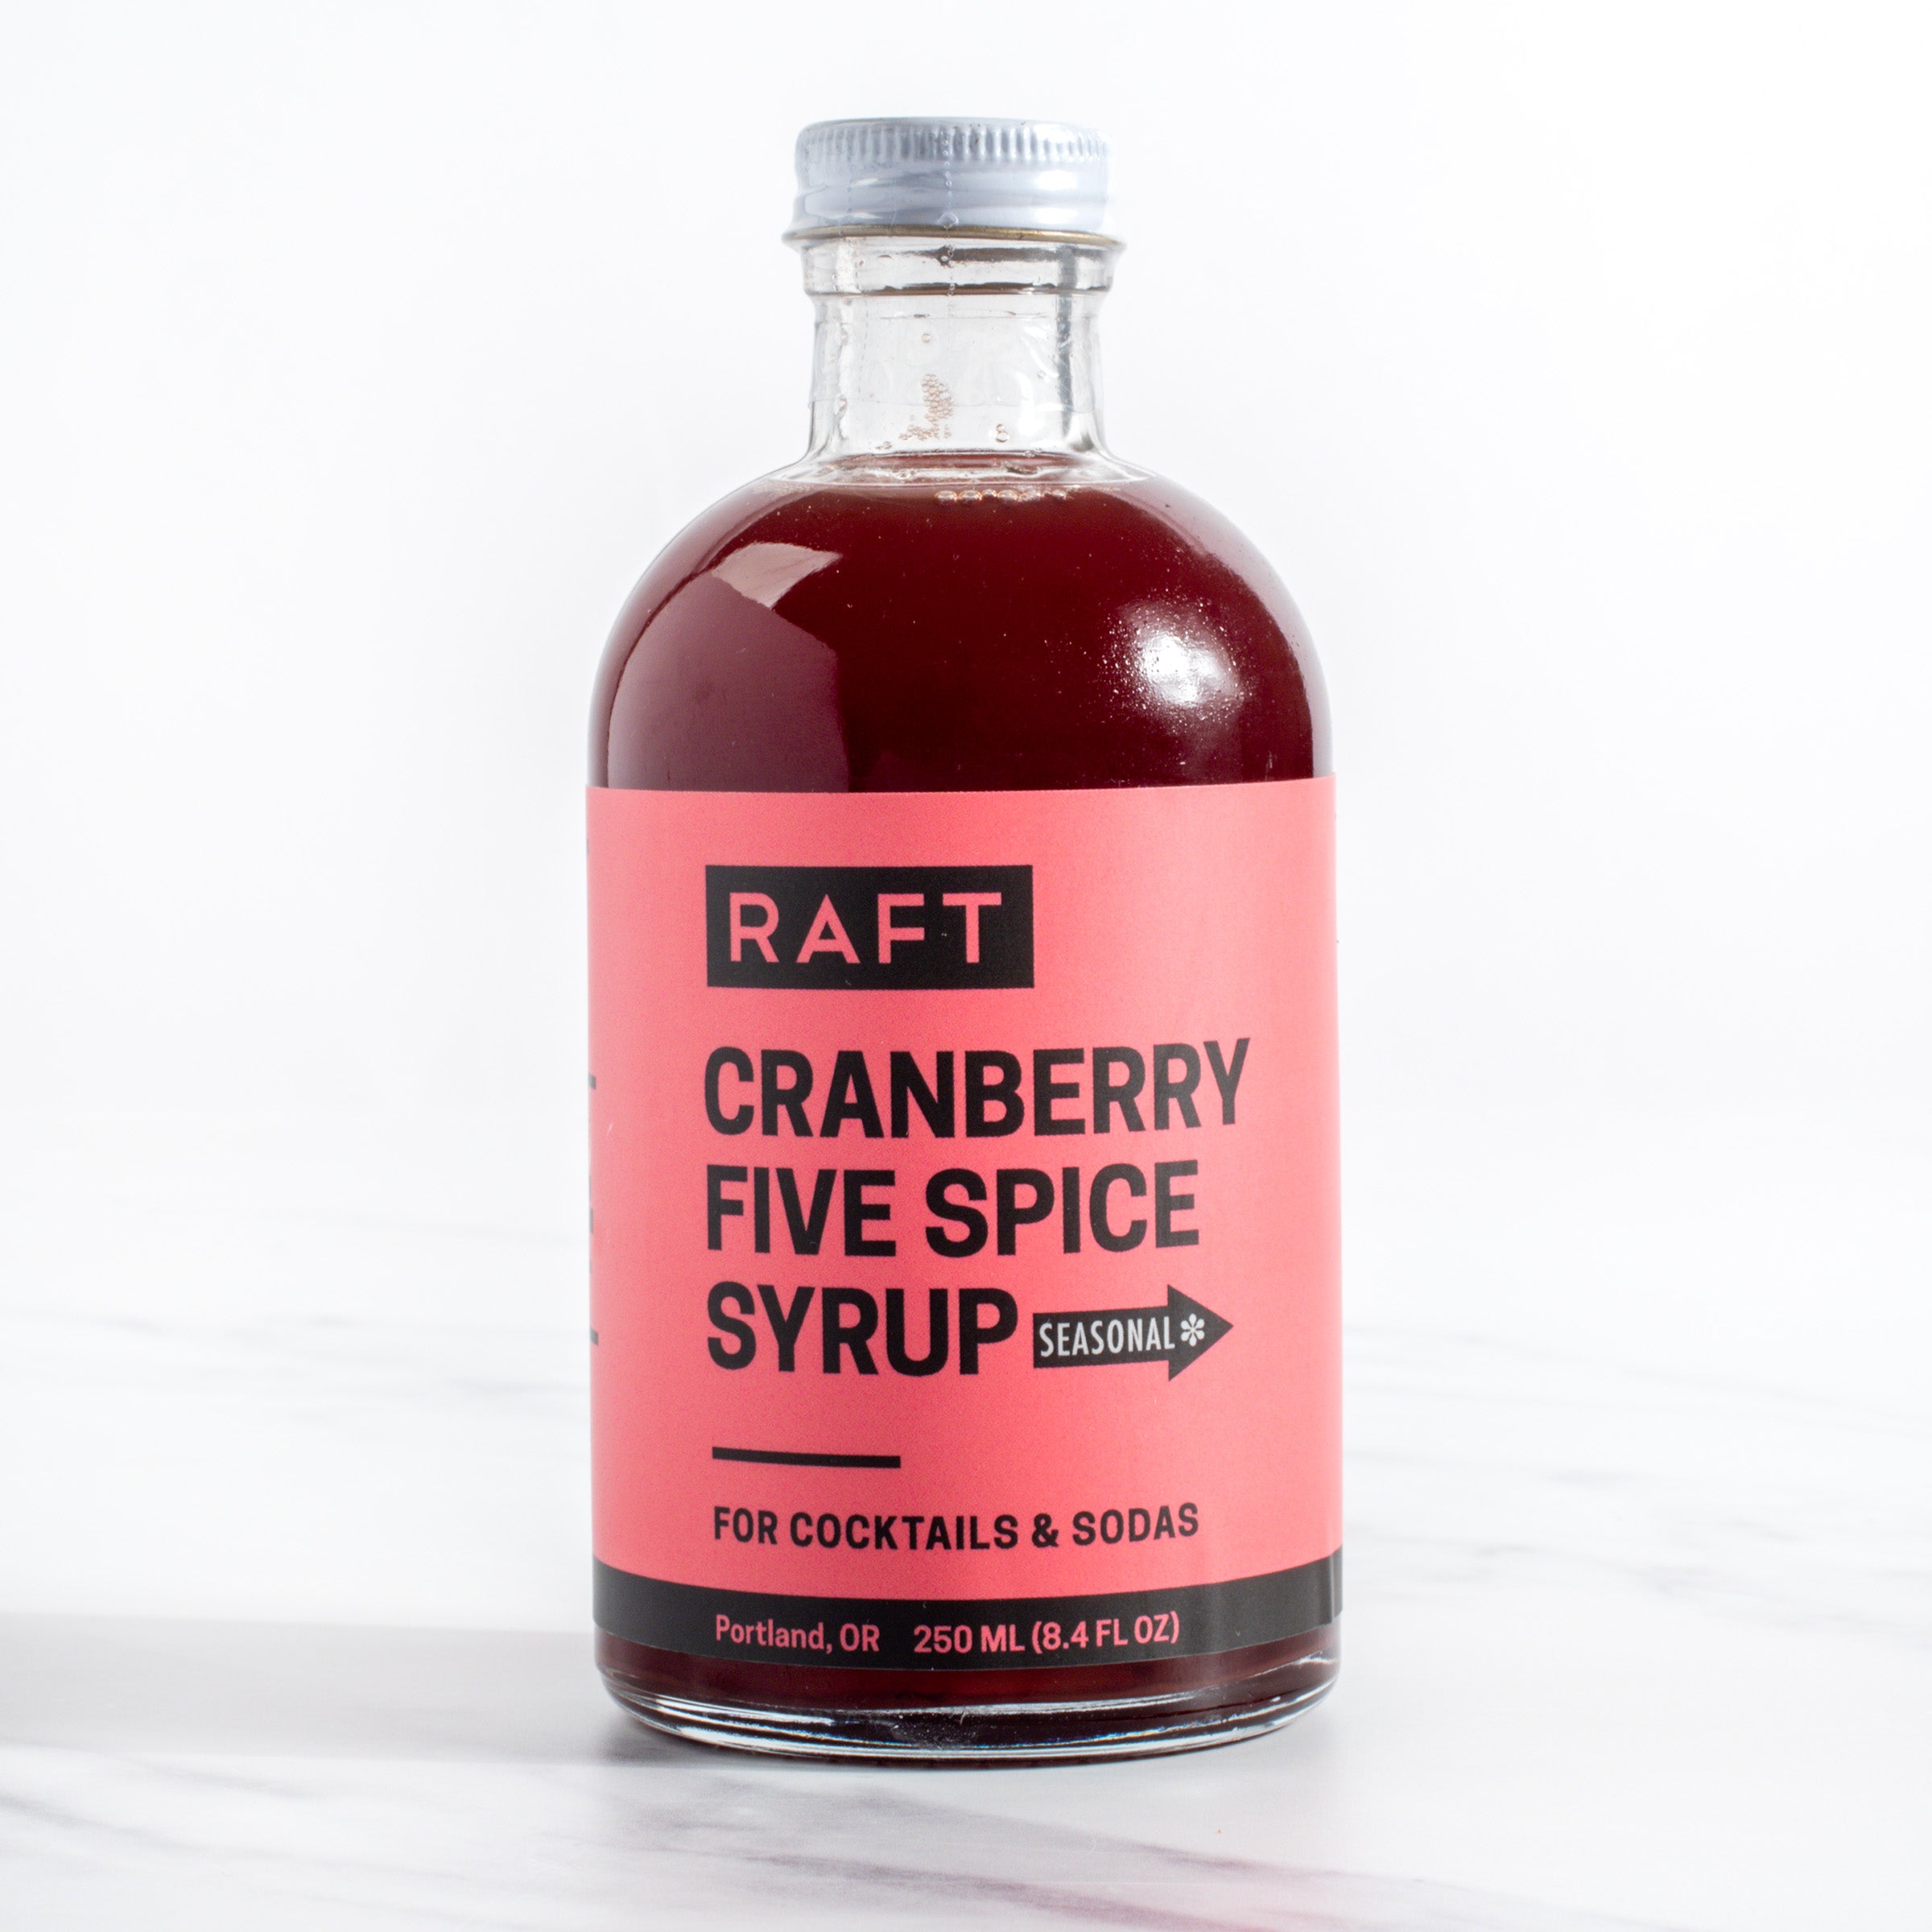 All Natural Cranberry Five Spice Syrup